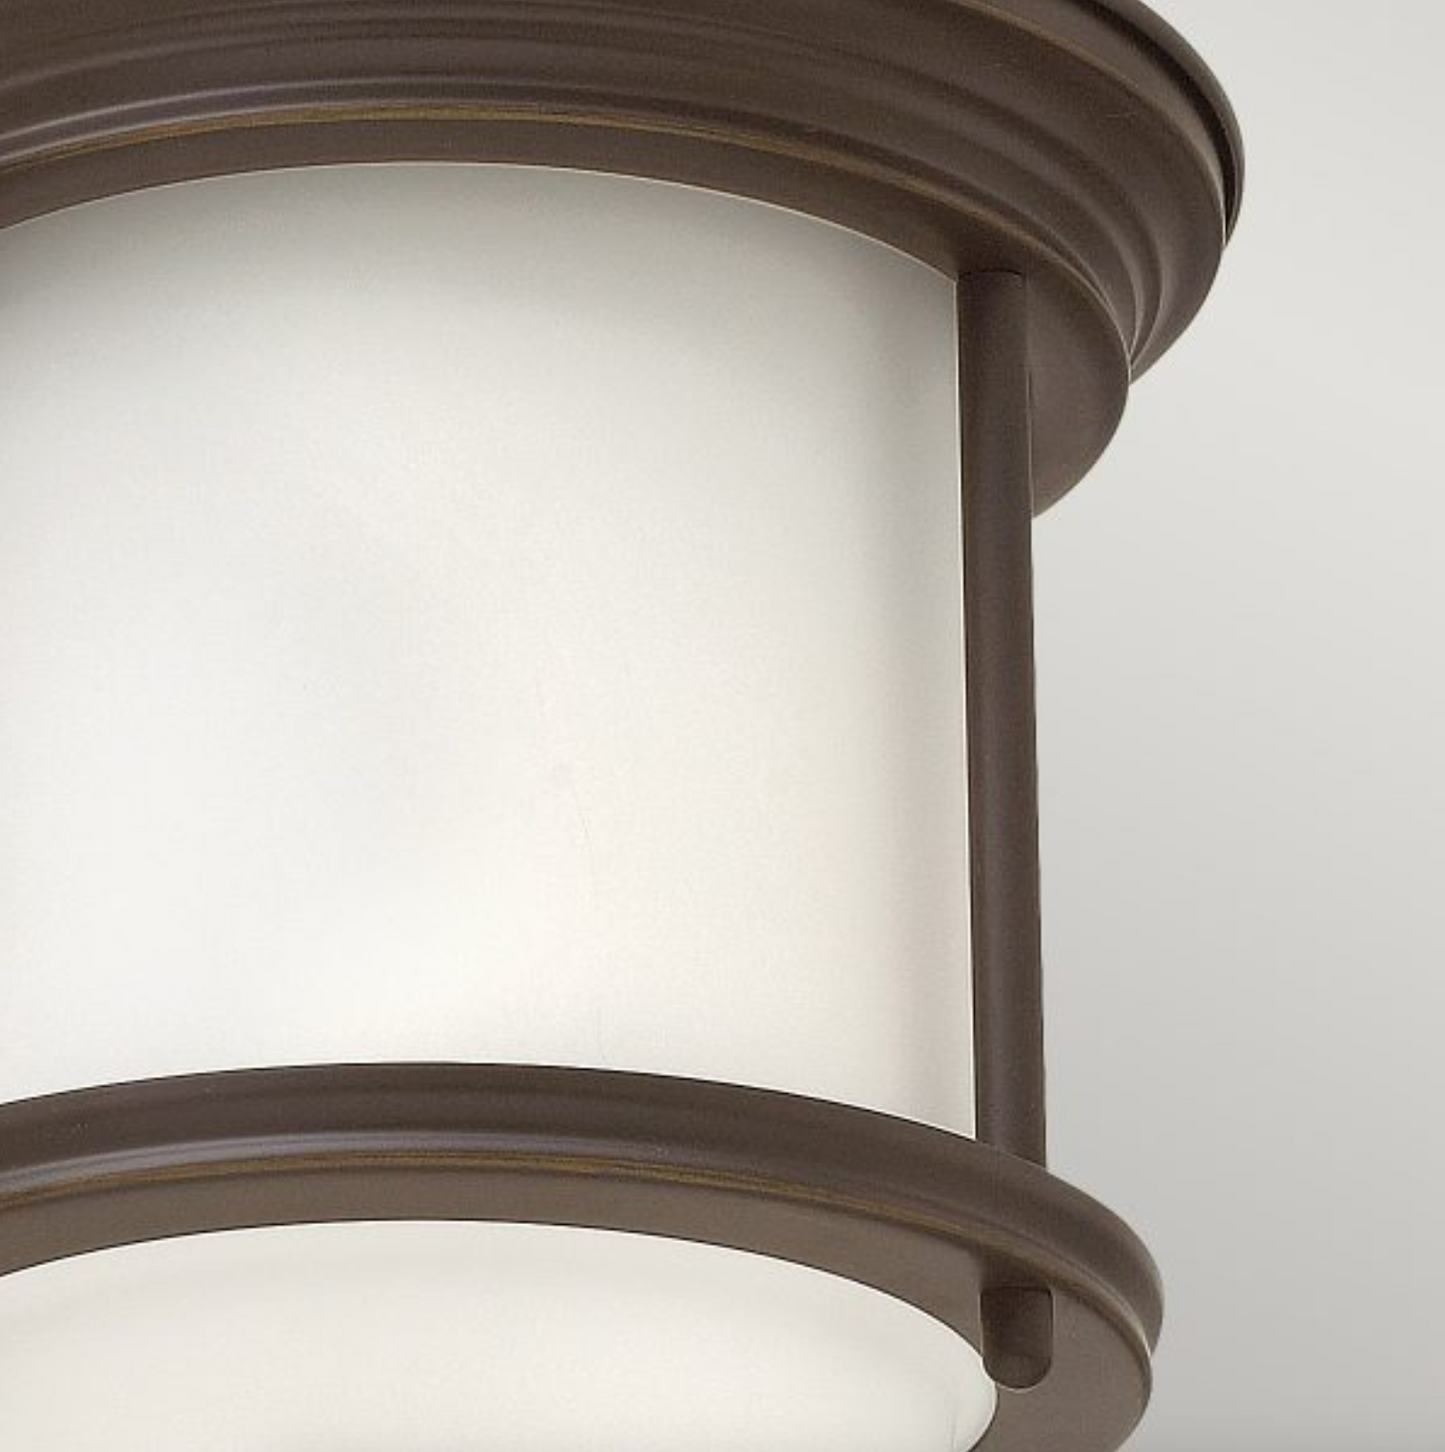 HAD Oil Rubbed Bronze & Opal Glass One Lamp Semi Flush IP44 Ceiling Light - 12575